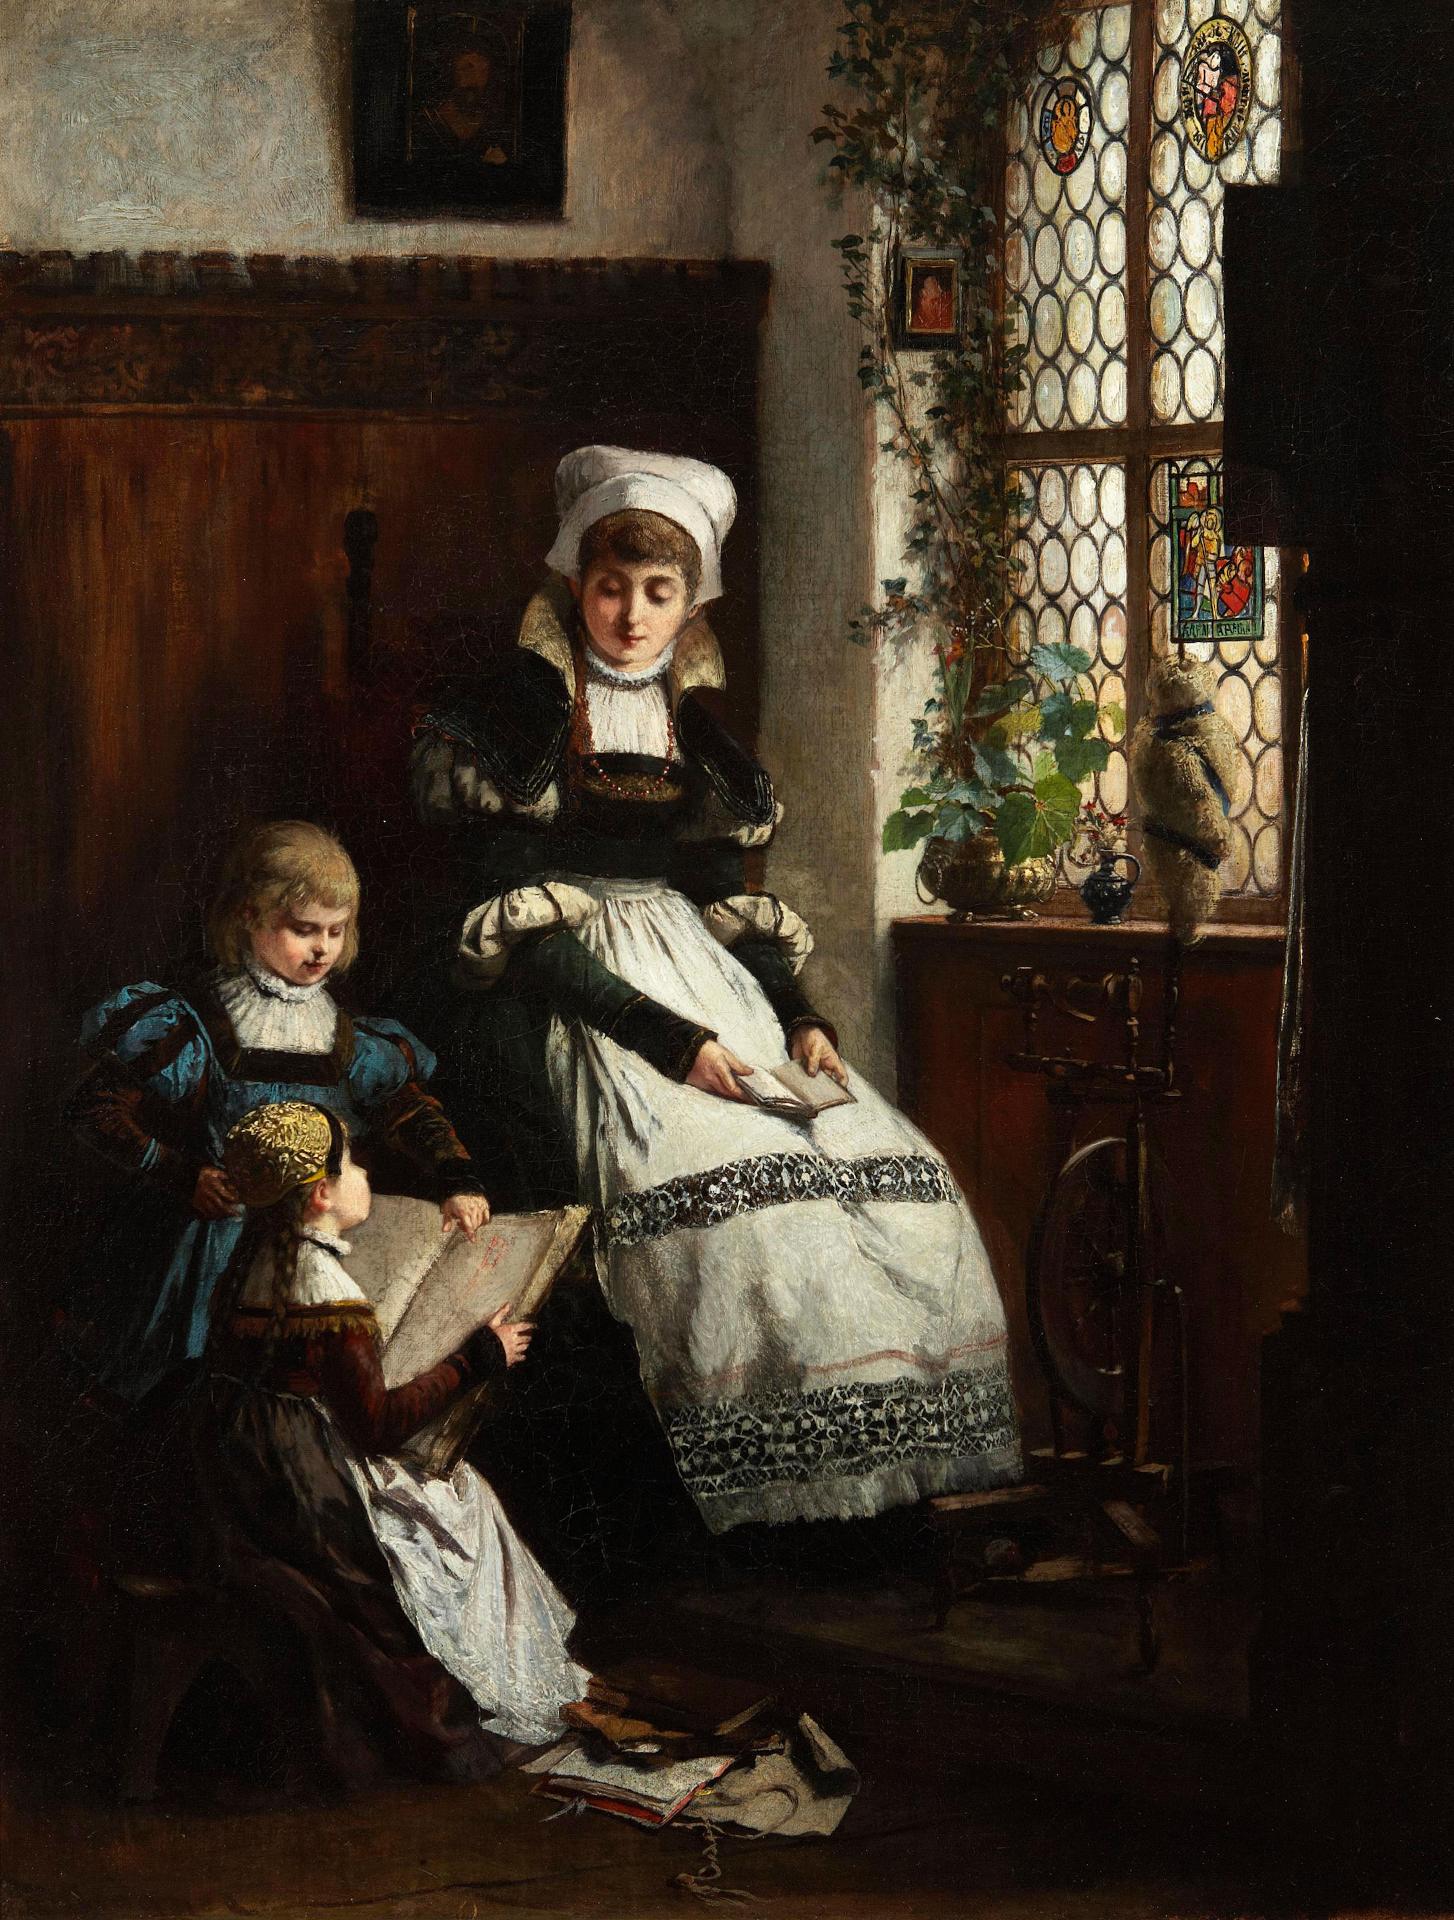 H. Wagner - Mother and children in interior